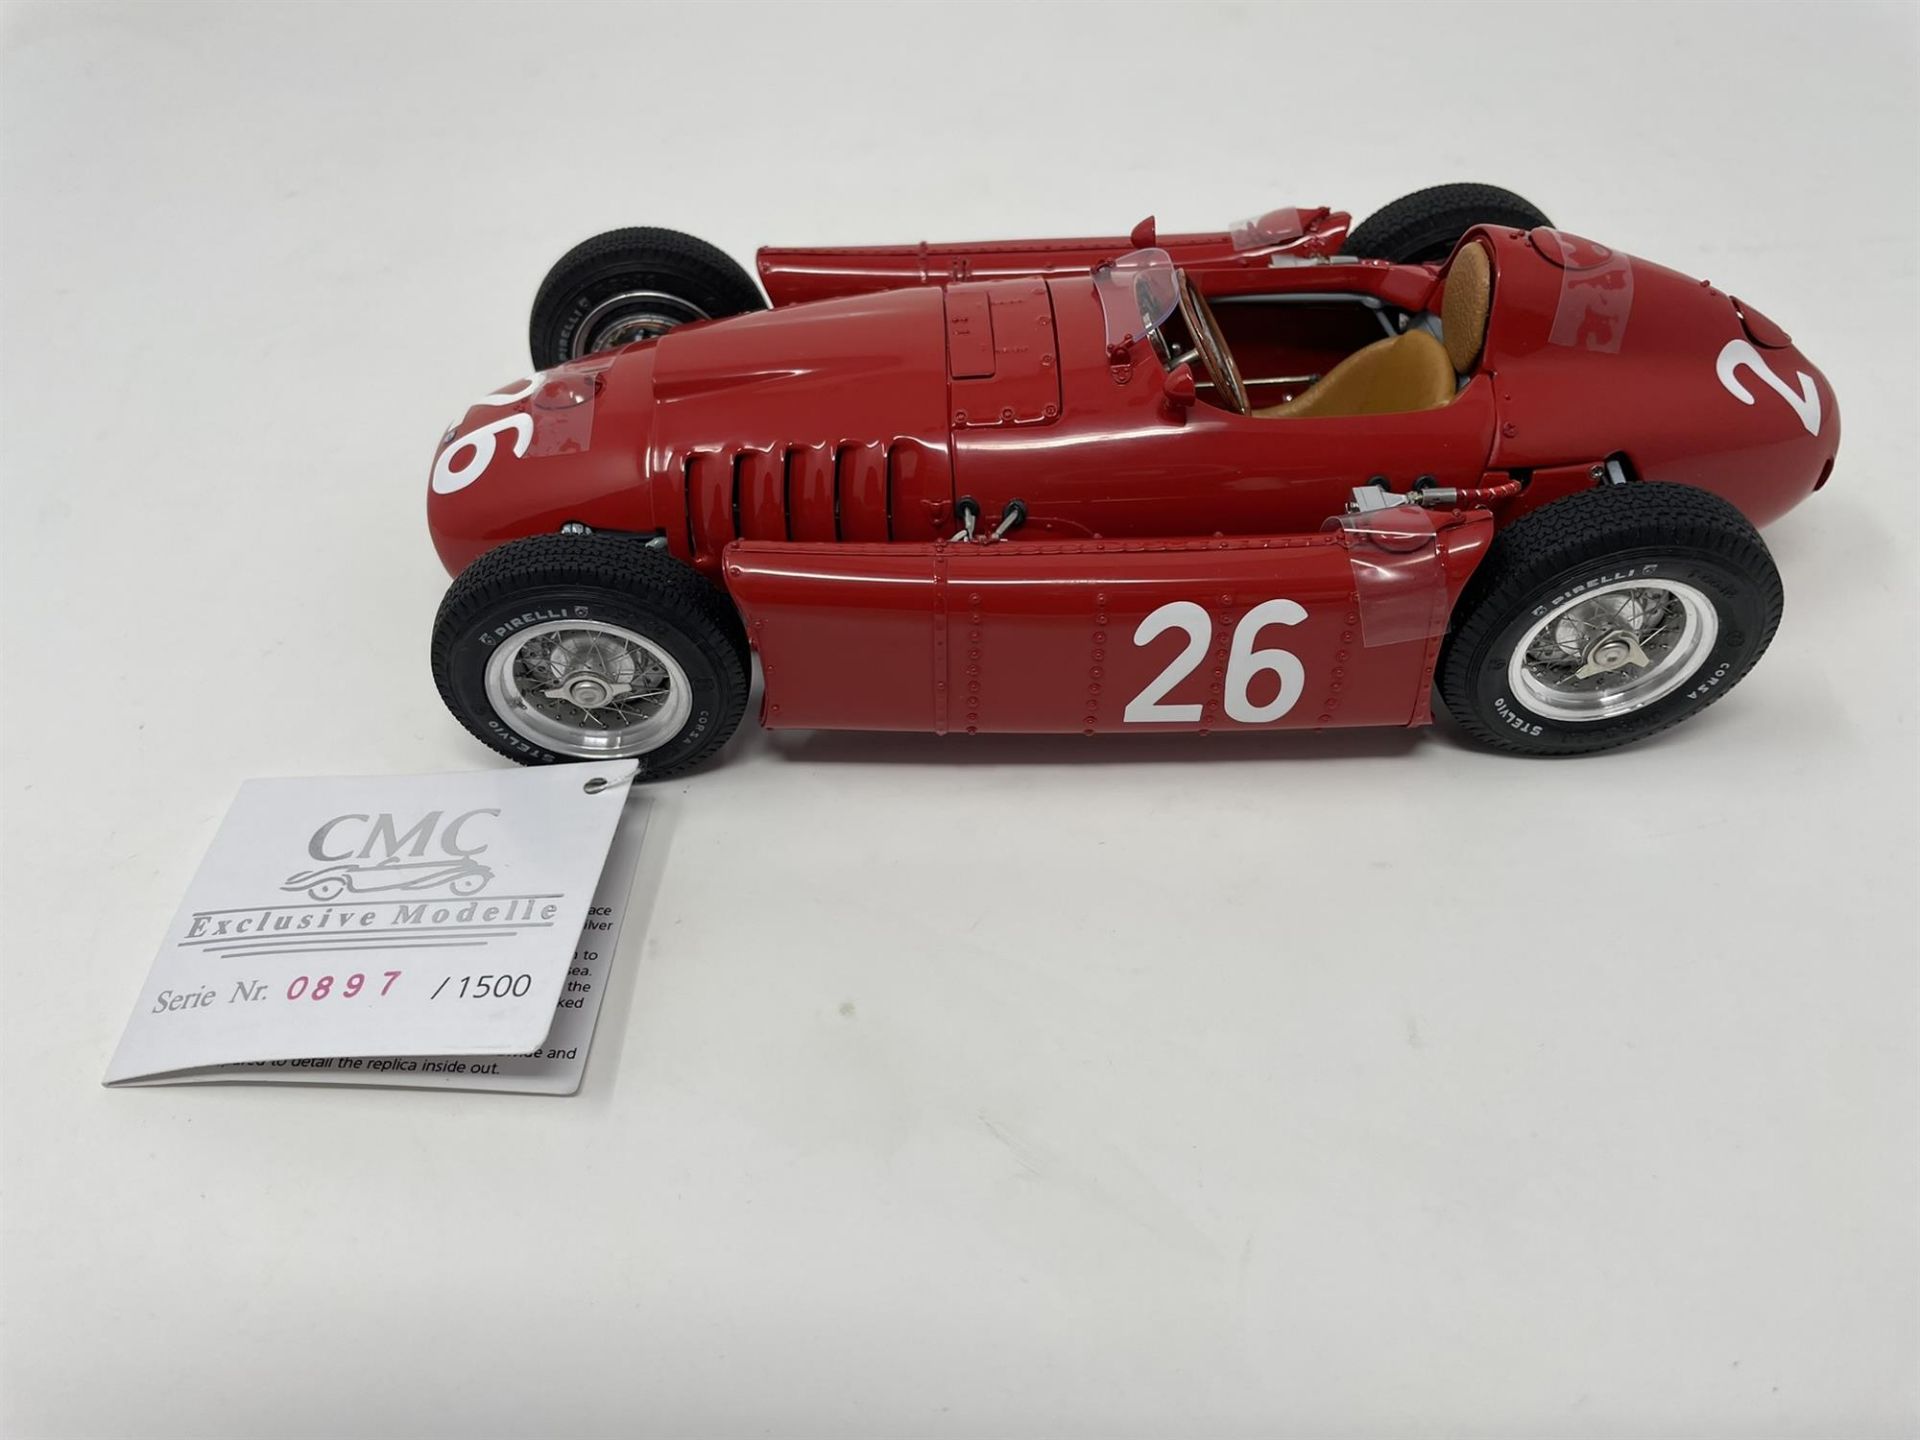 CMC Lancia D50 1:18th Scale Highly Detailed Model - Image 9 of 10